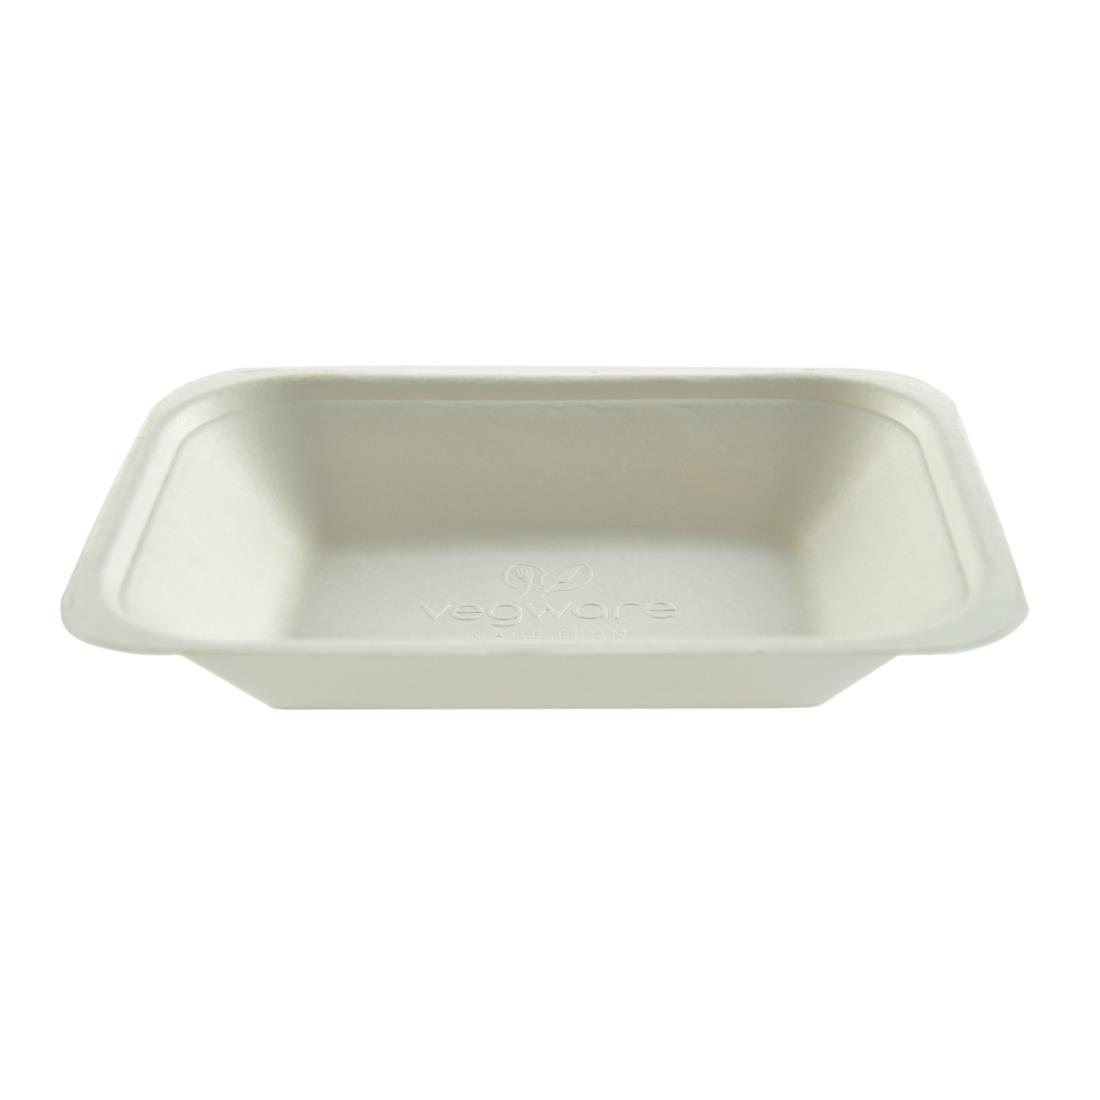 Vegware Compostable Bagasse Chip Trays 175mm (Pack of 500) - GH025  - 1